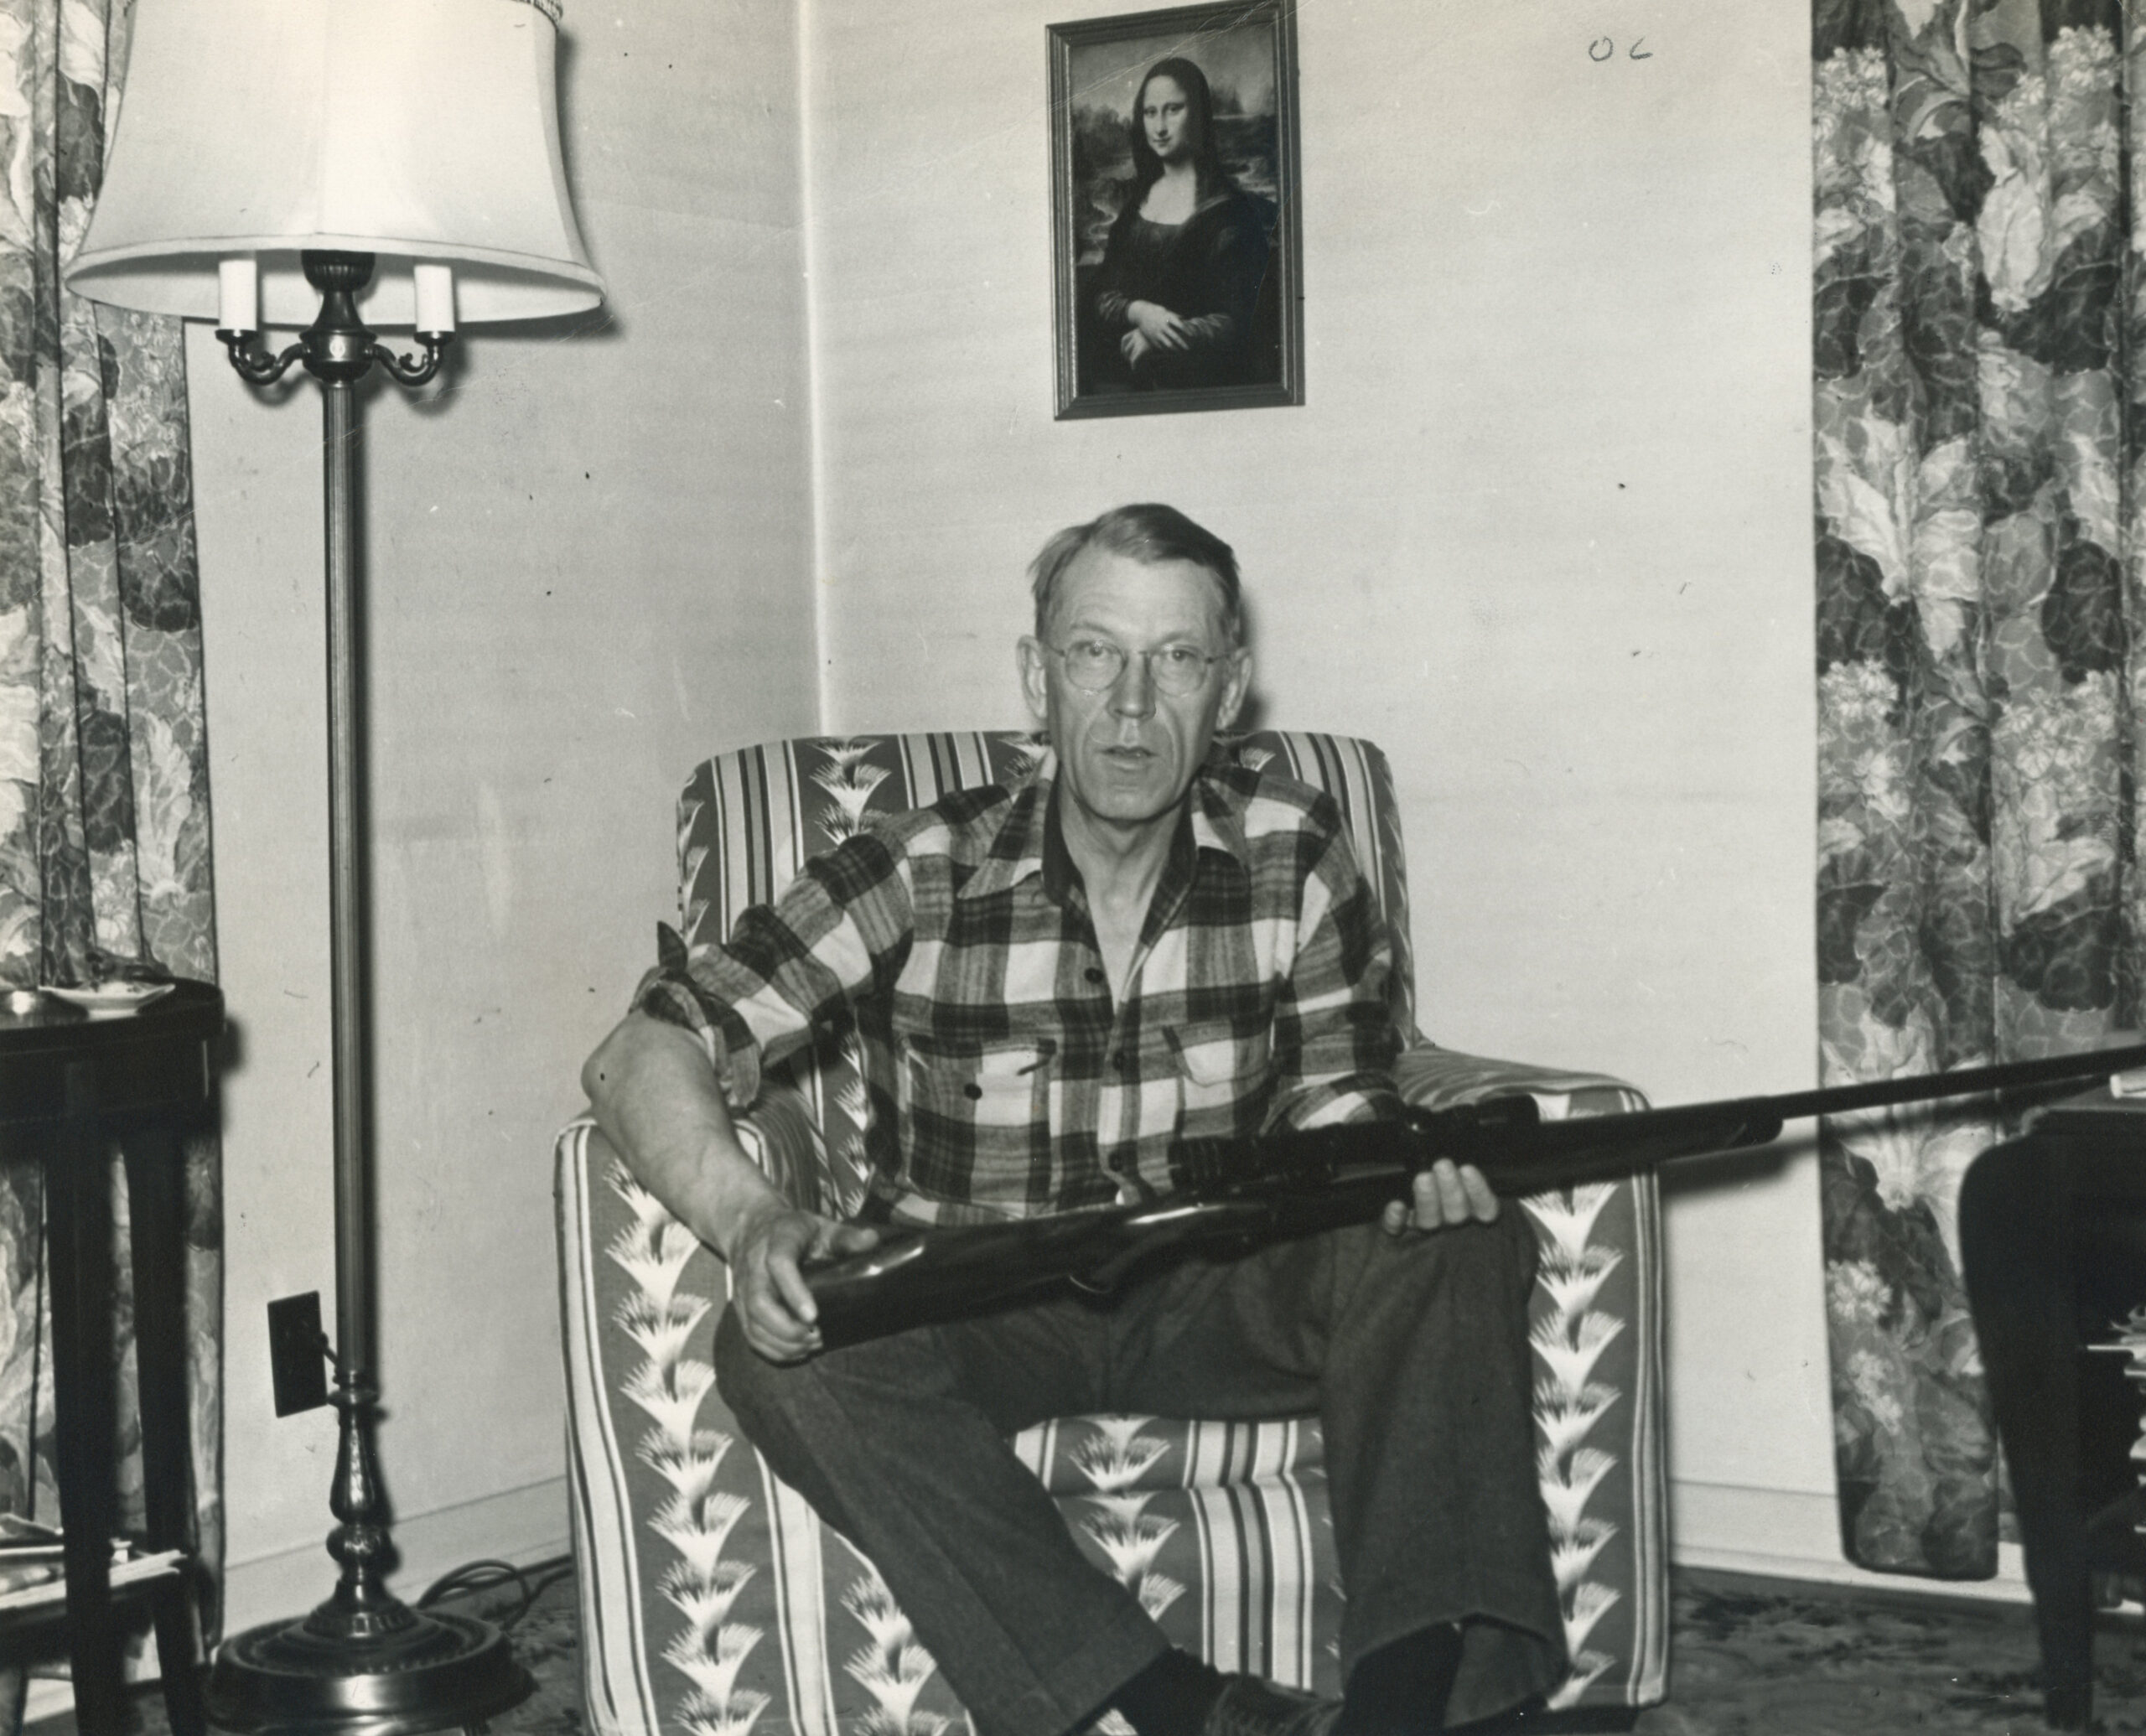 Jack O'Connor with a rifle.